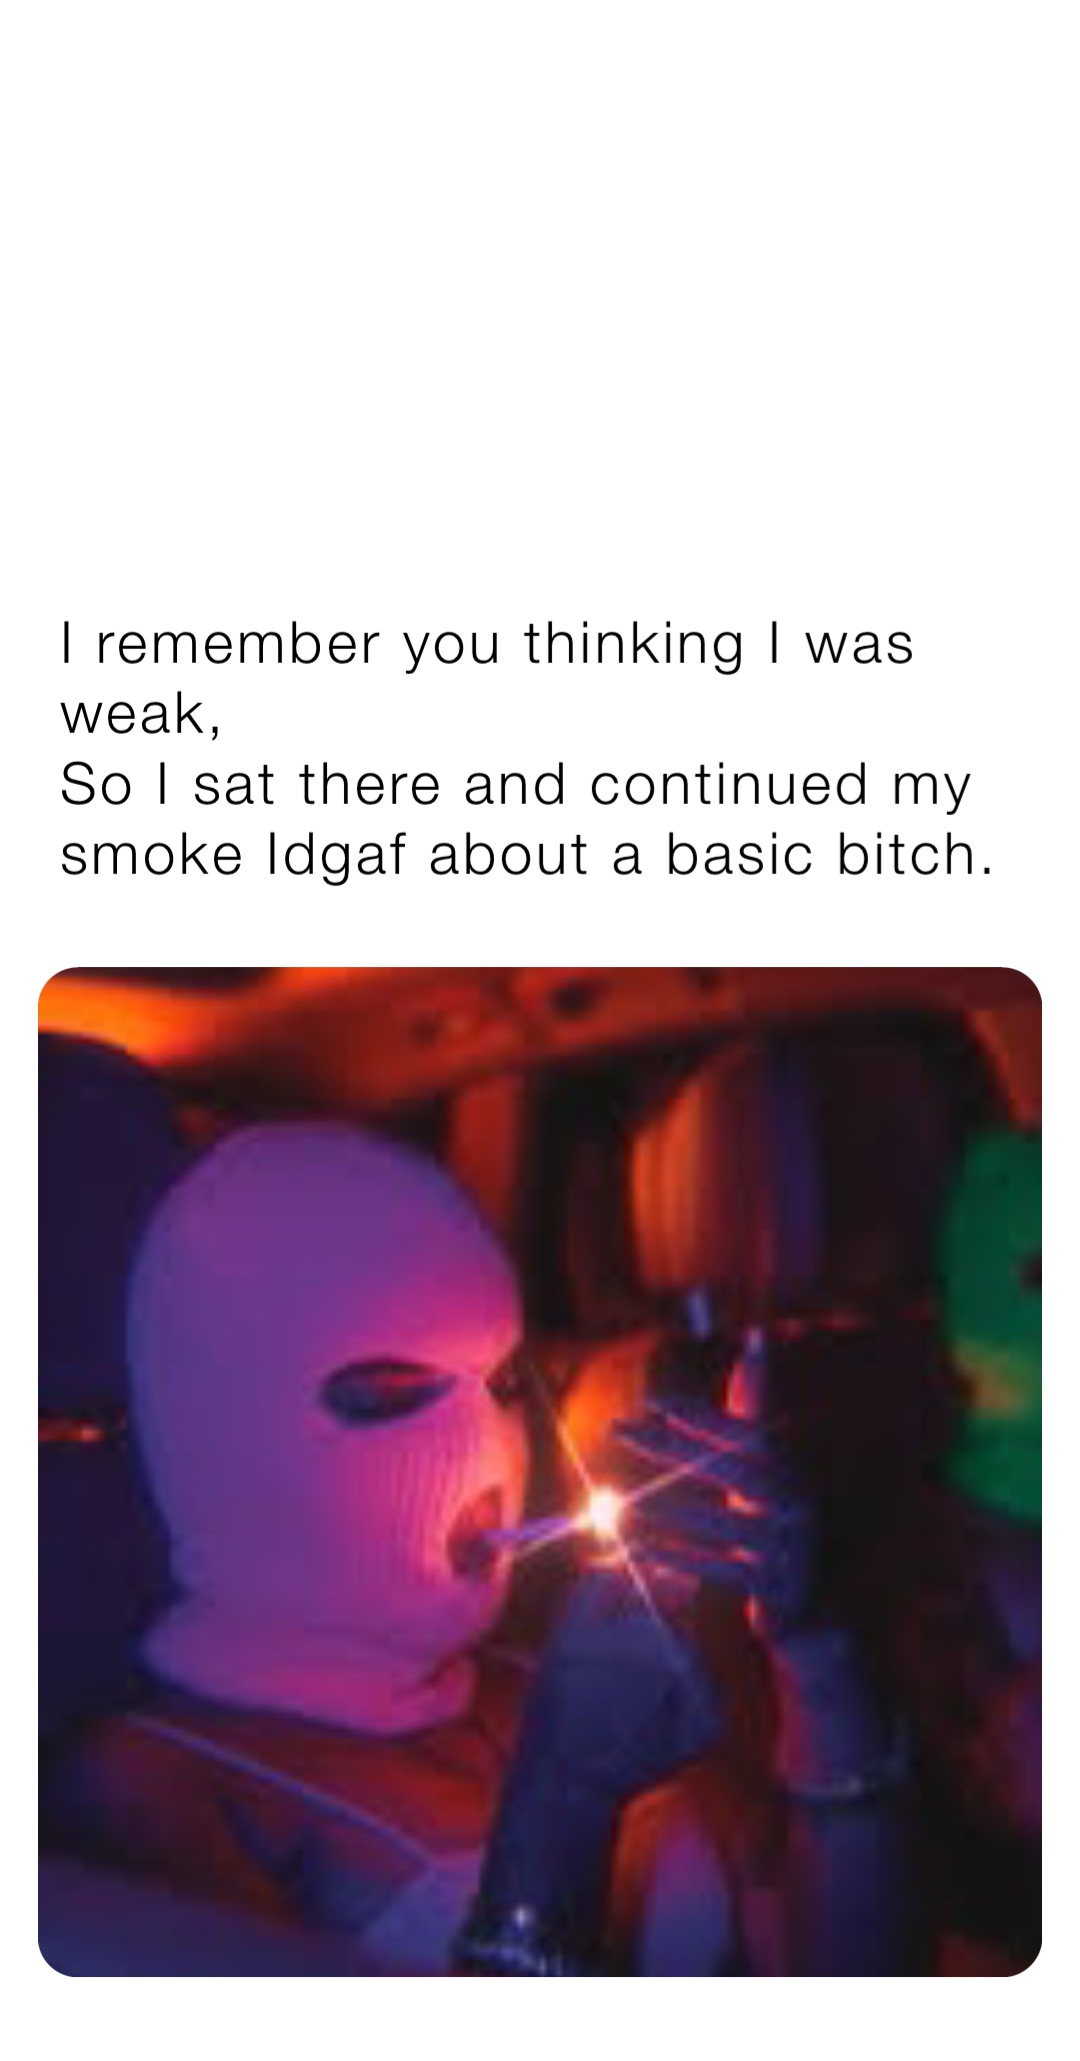 I remember you thinking I was weak, 
So I sat there and continued my smoke Idgaf about a basic bitch.